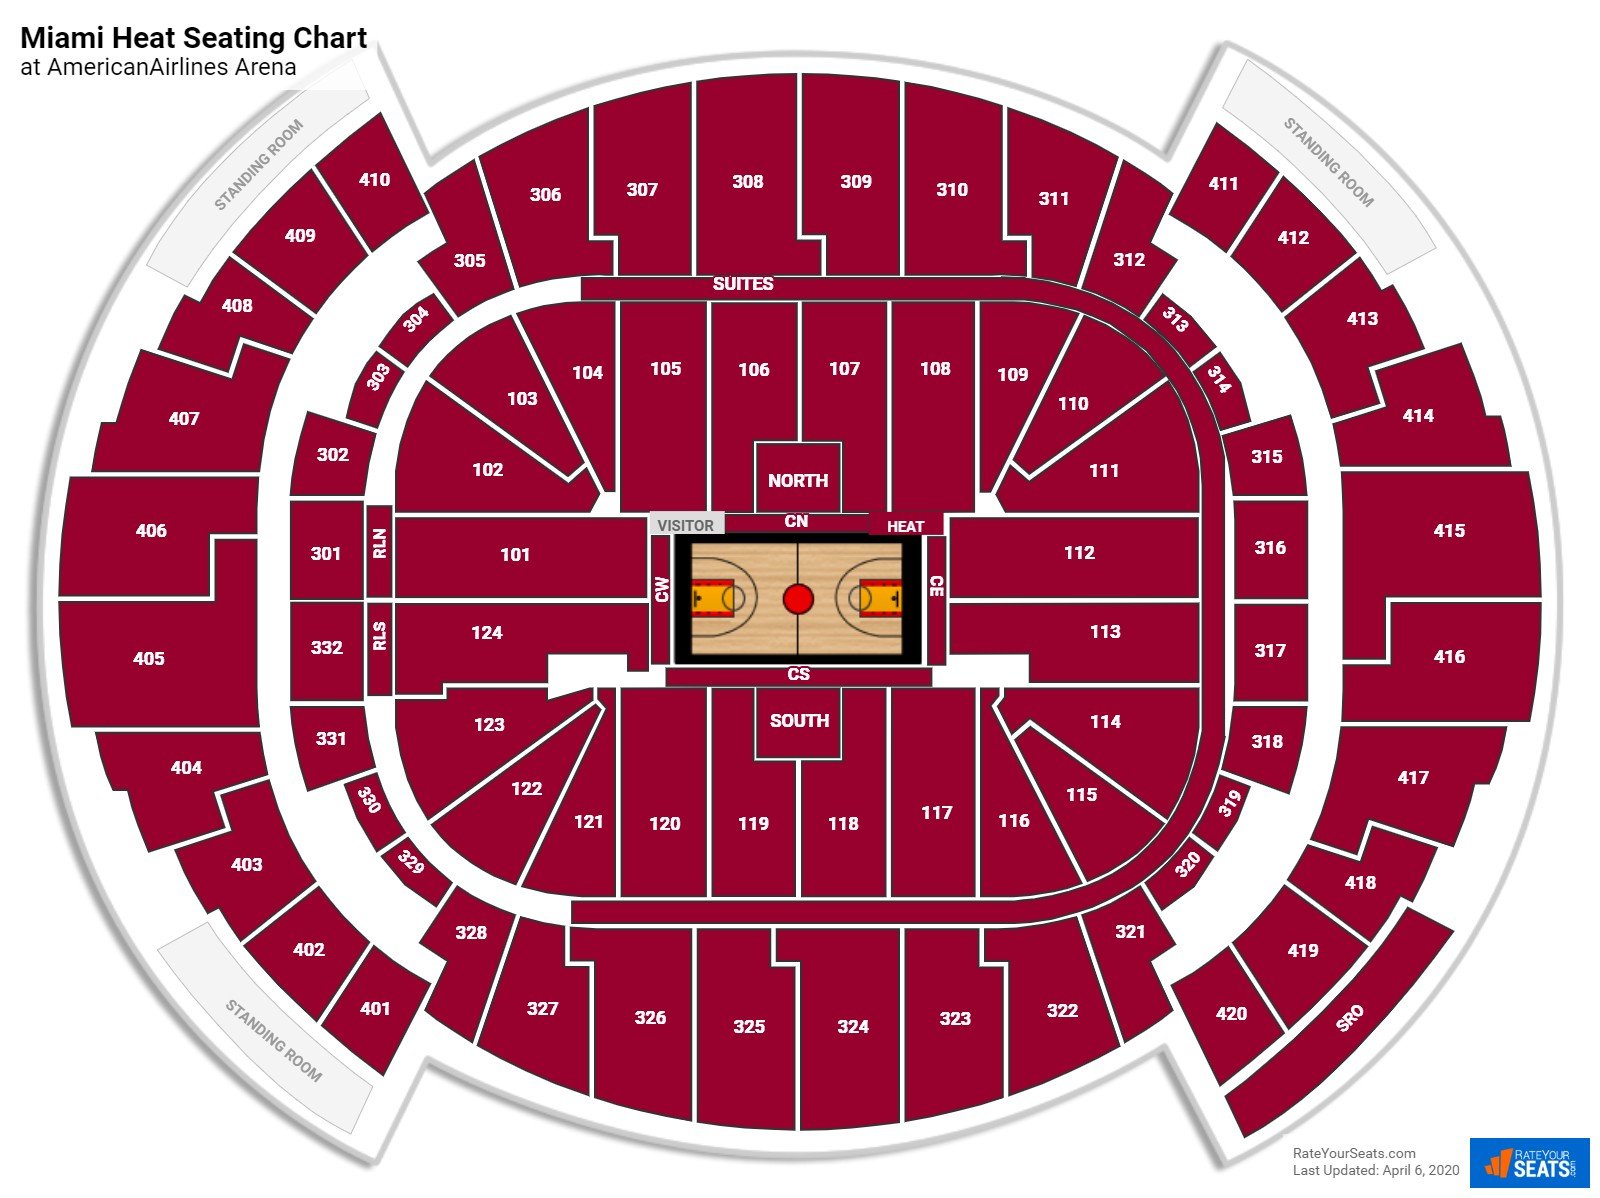 Section 315 at AmericanAirlines Arena - Miami Heat - RateYourSeats.com